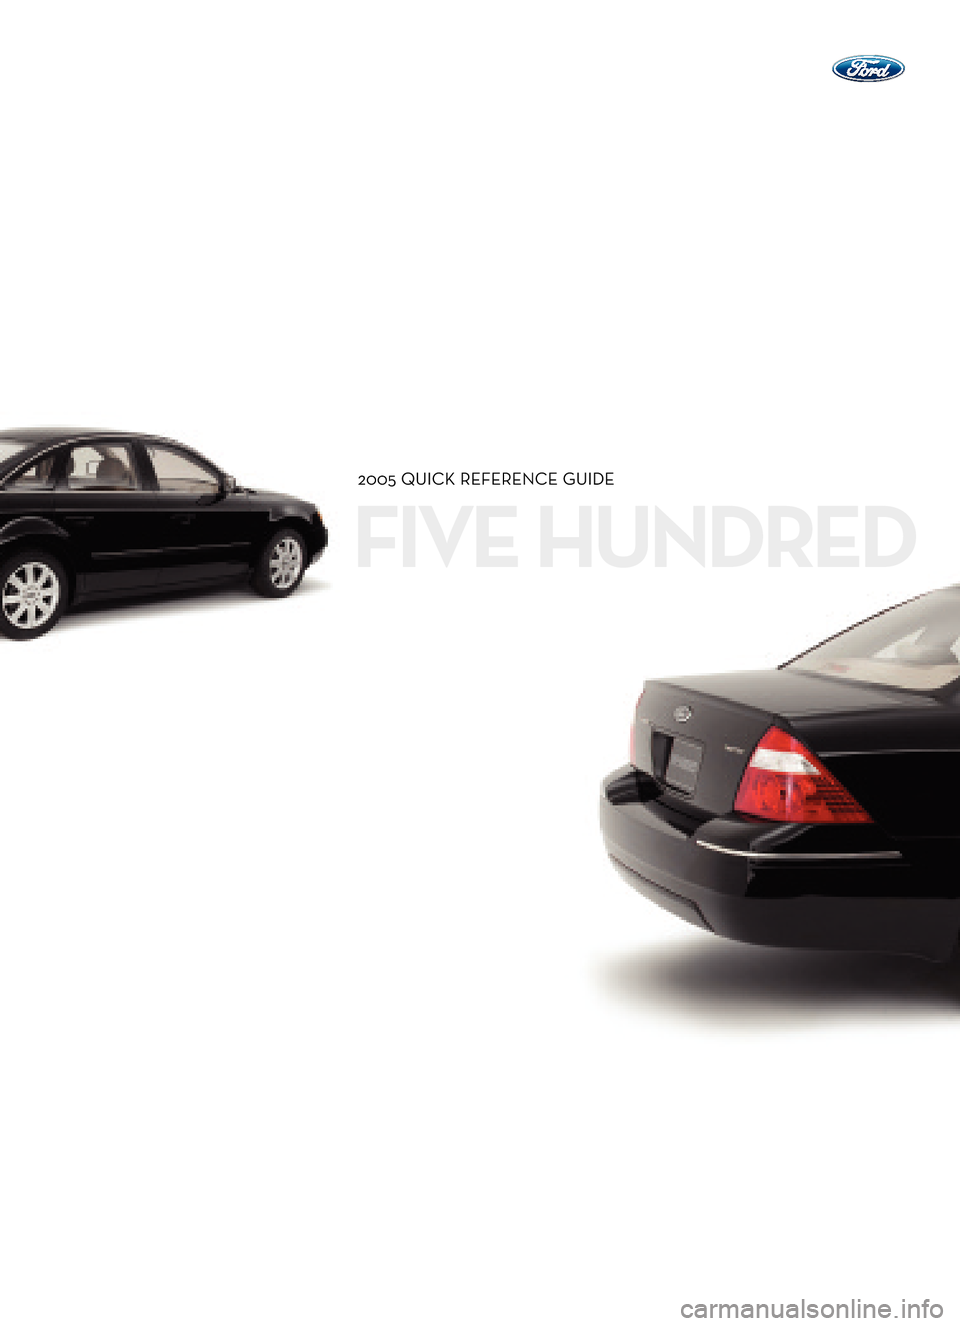 FORD FIVE HUNDRED 2005 D258 / 1.G Quick Reference Guide FIVE HUNDRED
2005 QUICK REFERENCE GUIDE
  